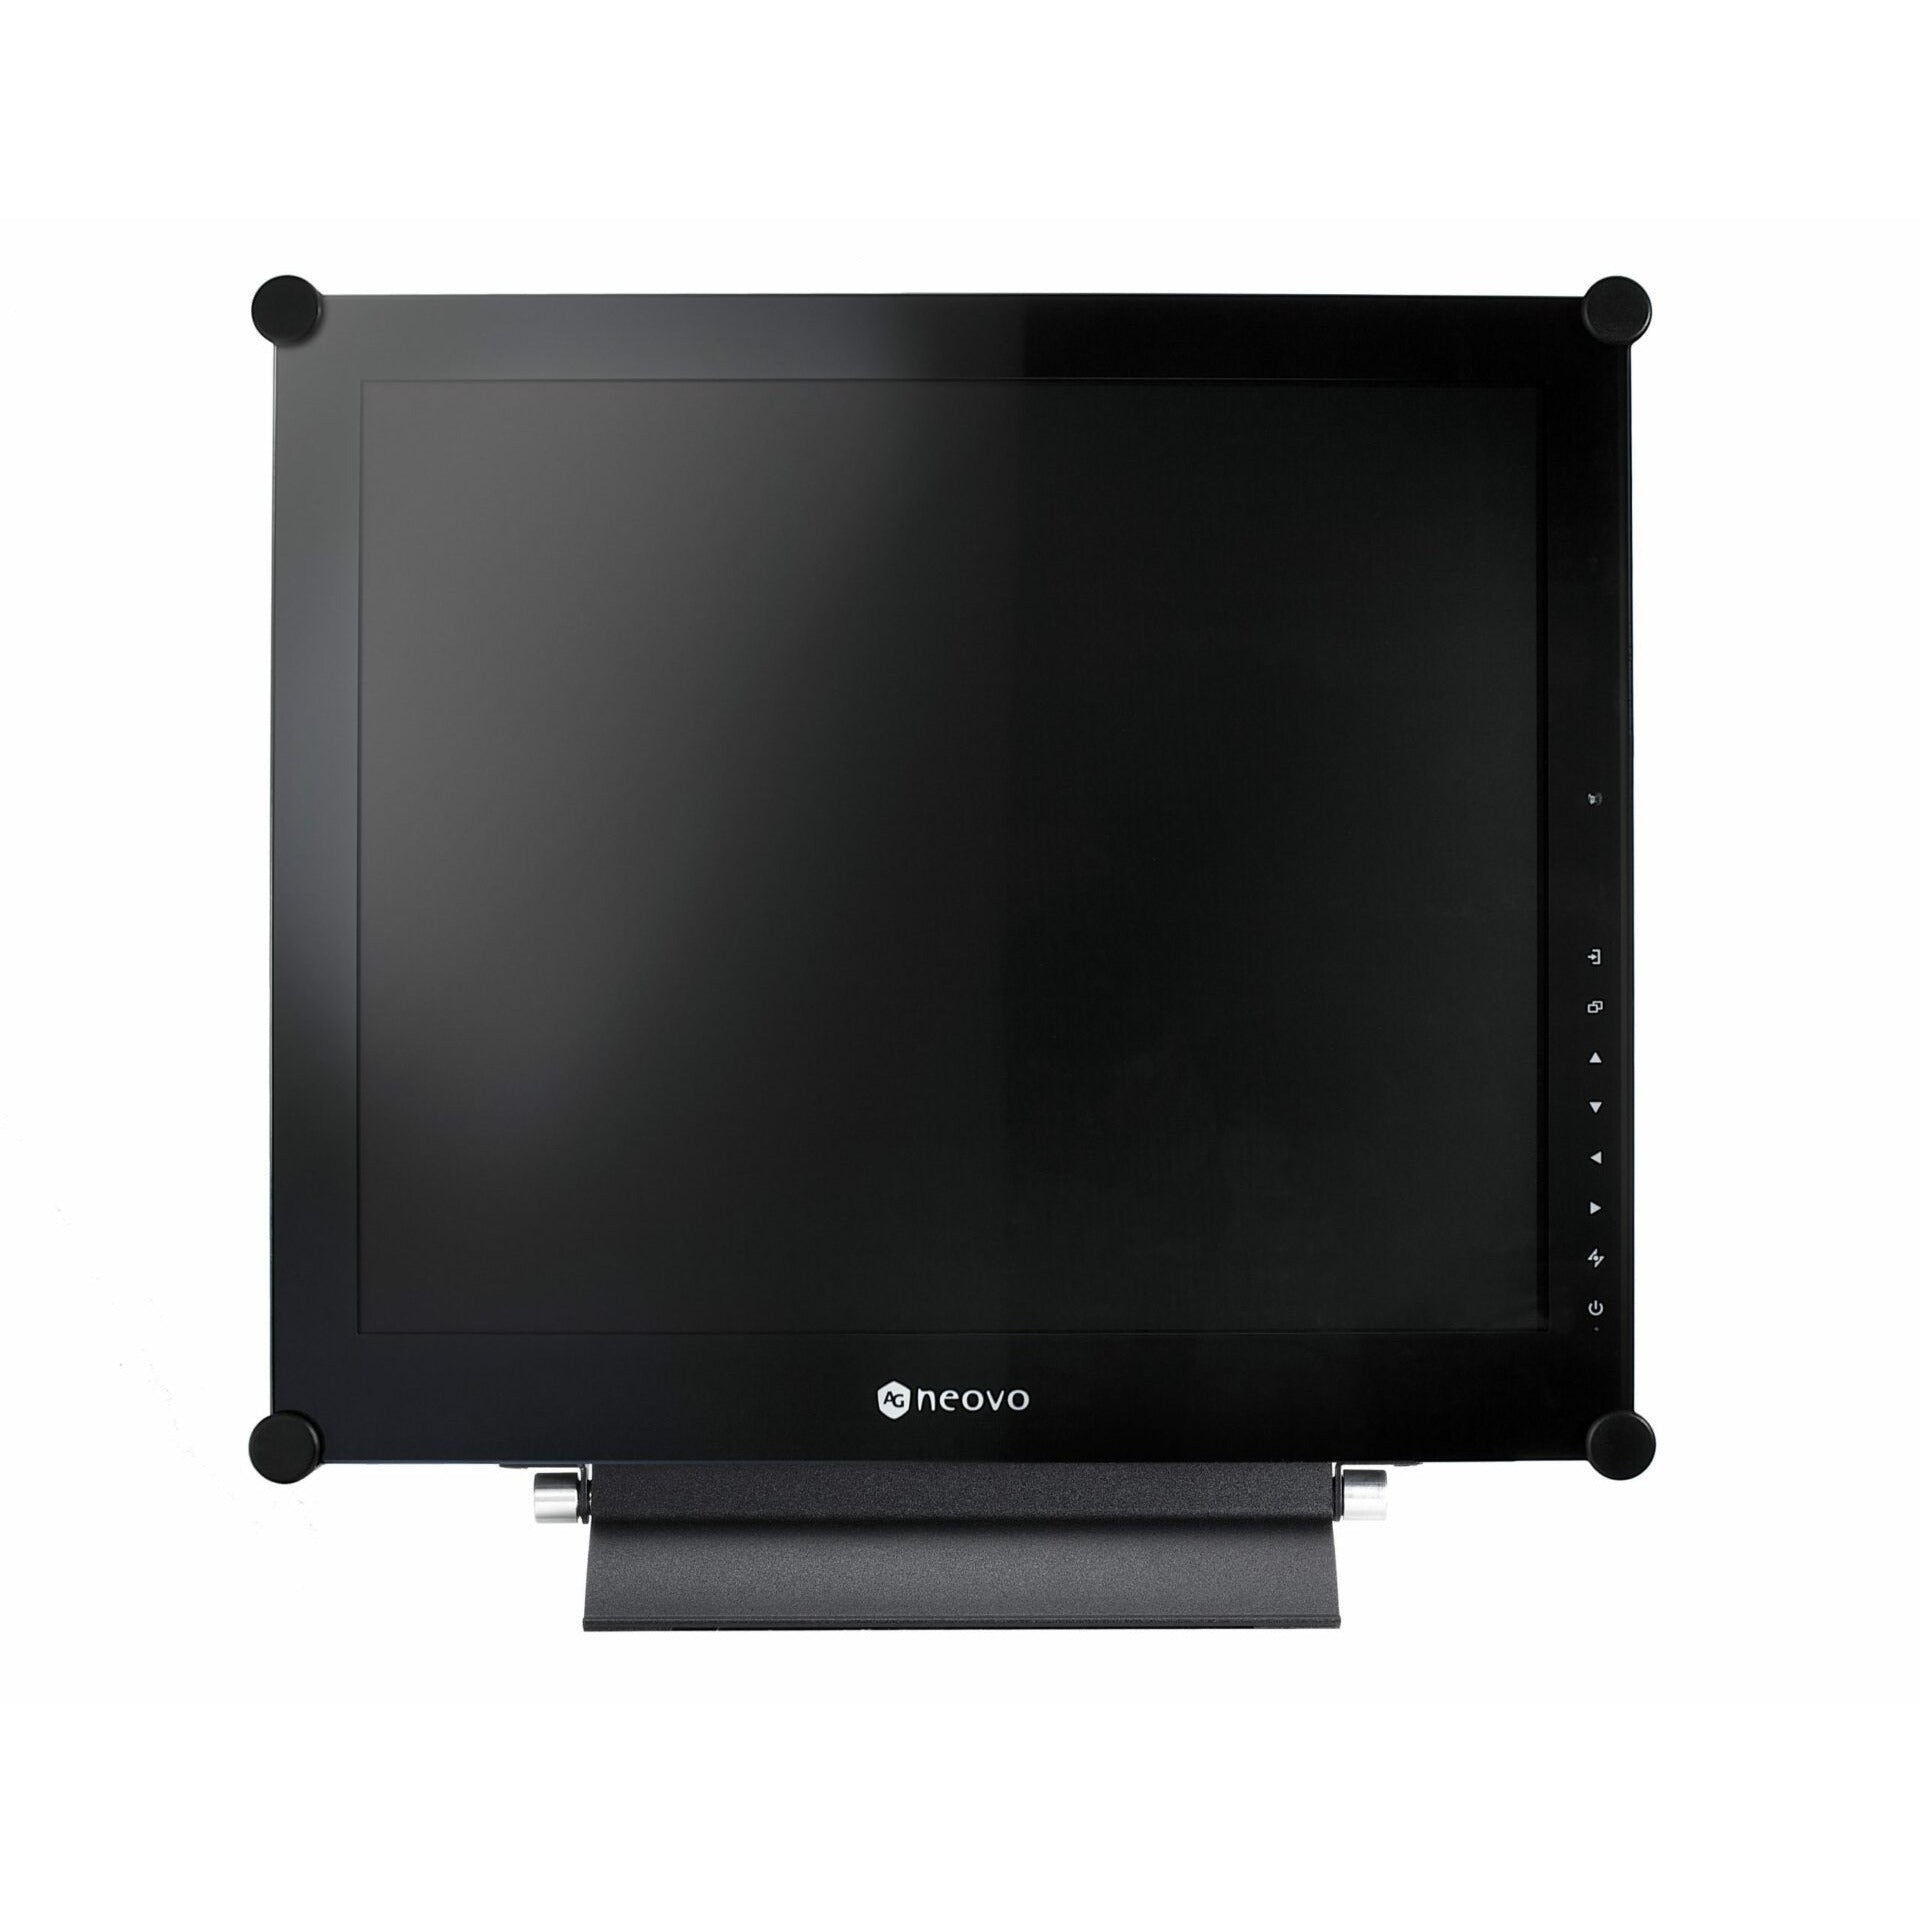 AG Neovo X-19E 19-Inch 5:4 Semi-Industrial Monitor With Metal Casing